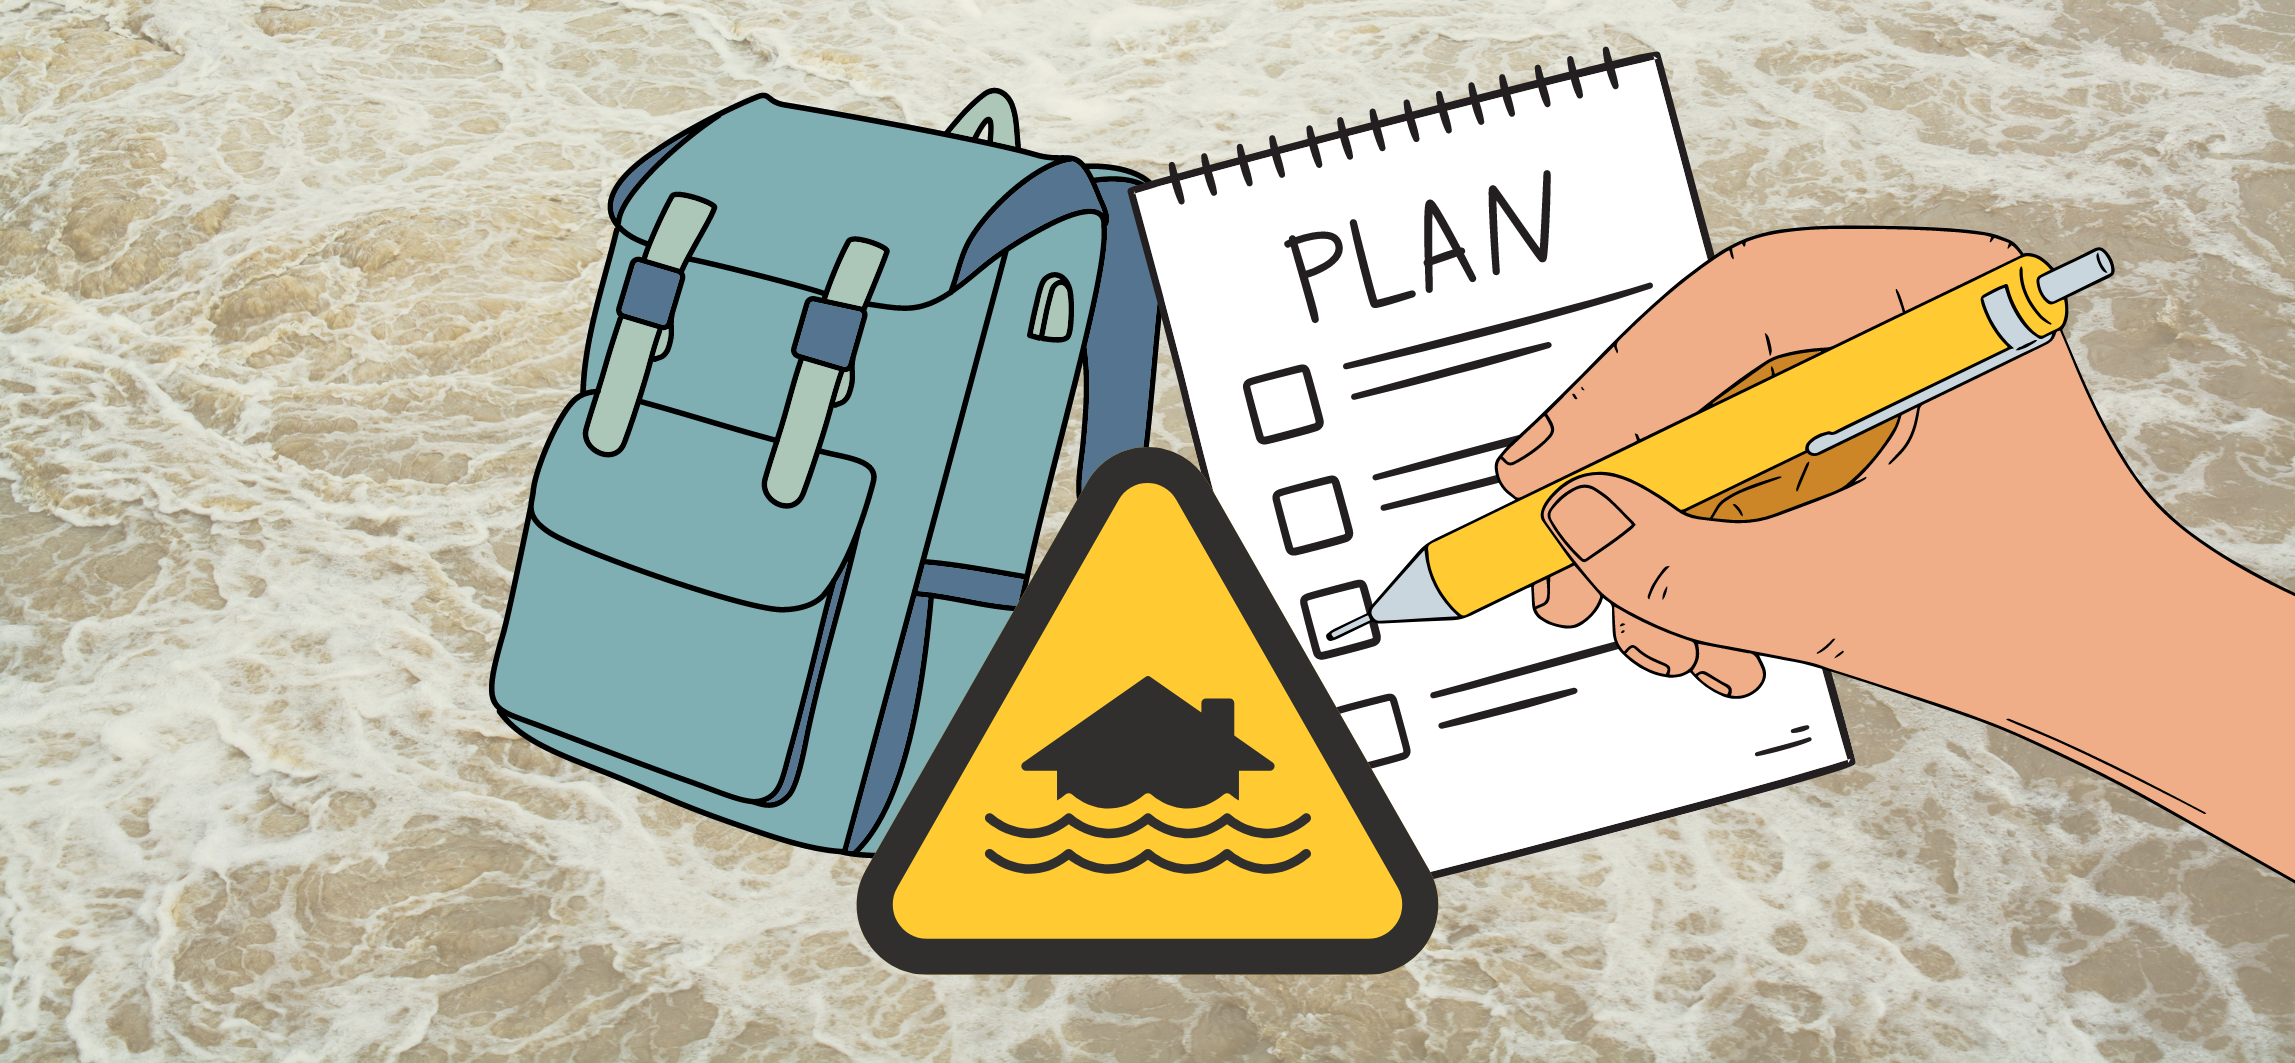 illustration of a backpack, plan checklist, and drought warning sign against a flood background